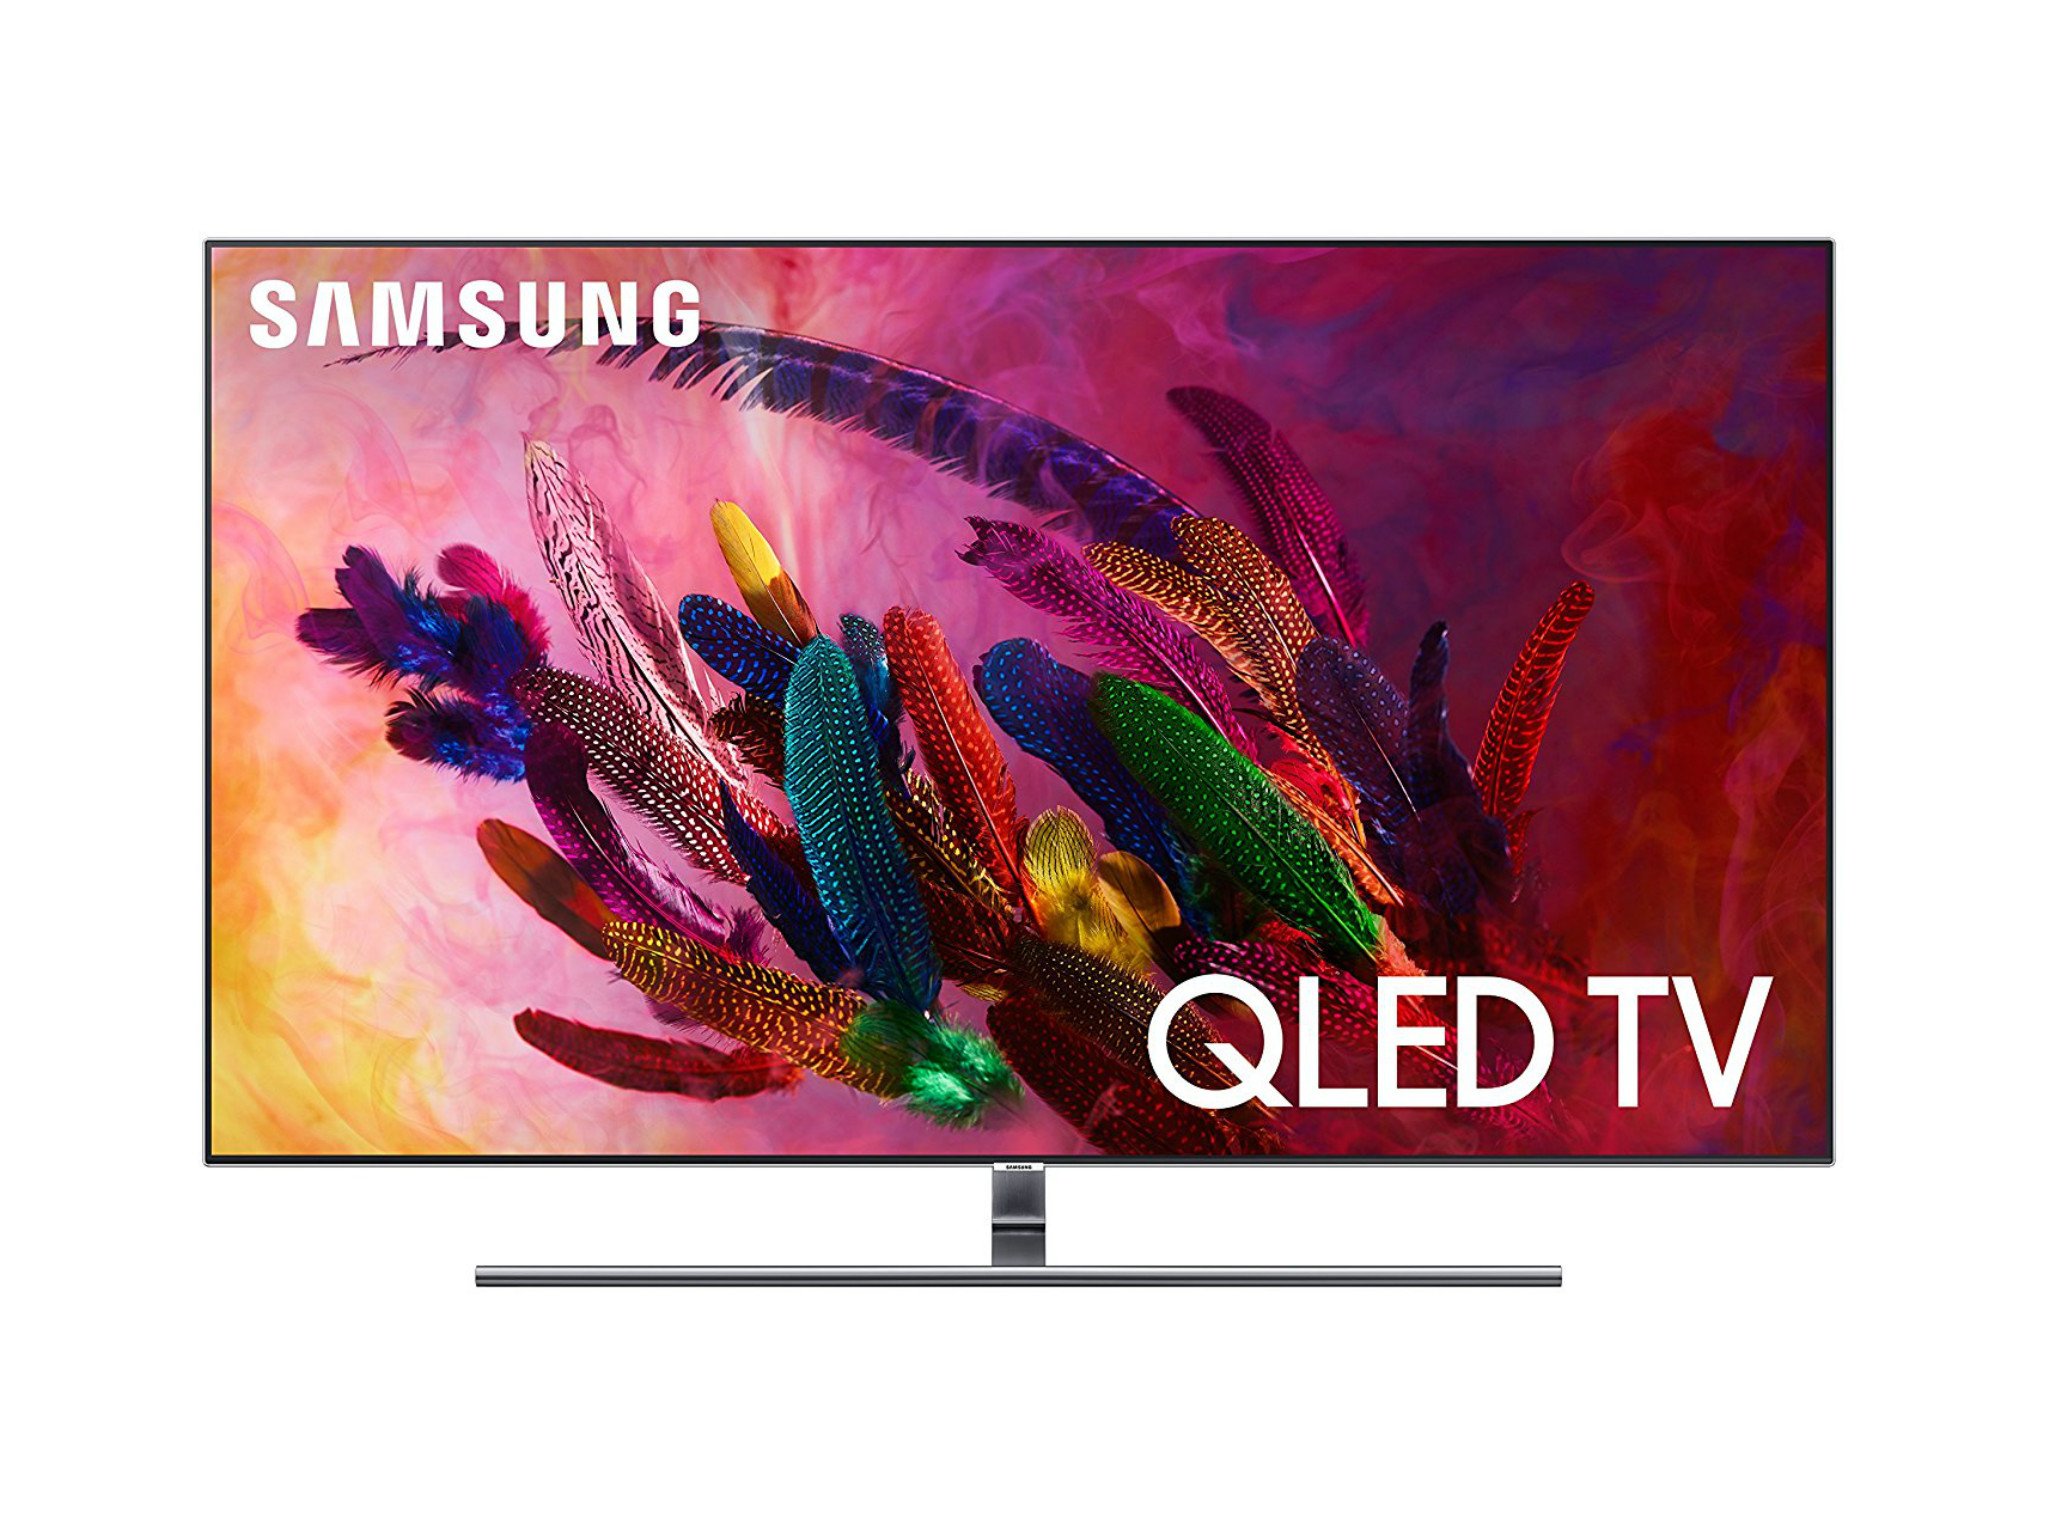 Samsung adds FreeSync support to its 2018 QLED TV lineup